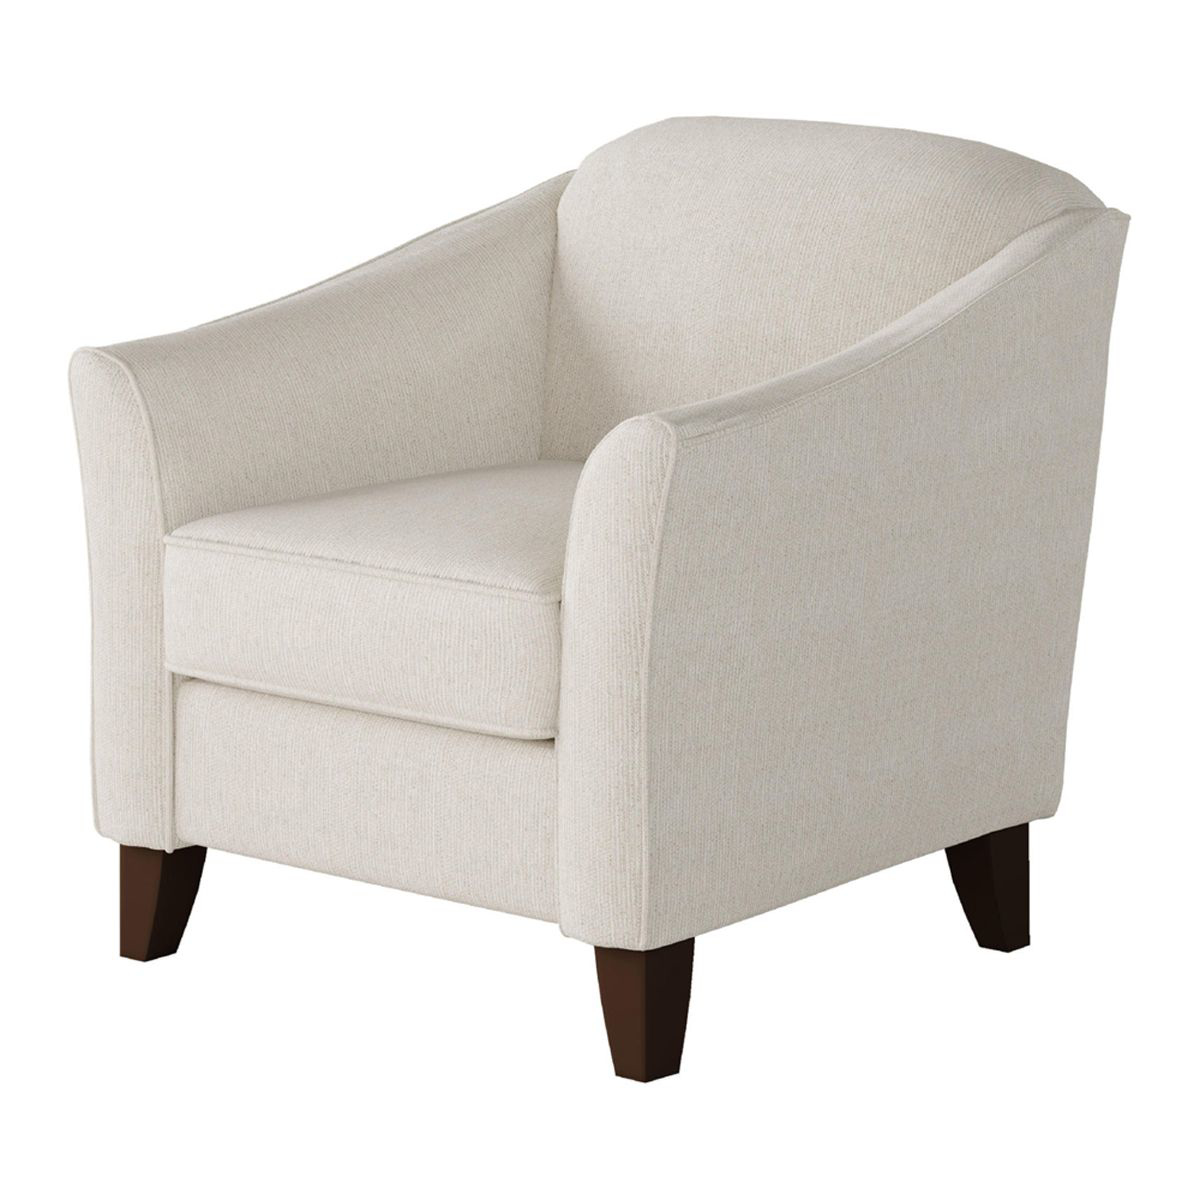 Picture of CUSTOM 452 ACCENT CHAIR